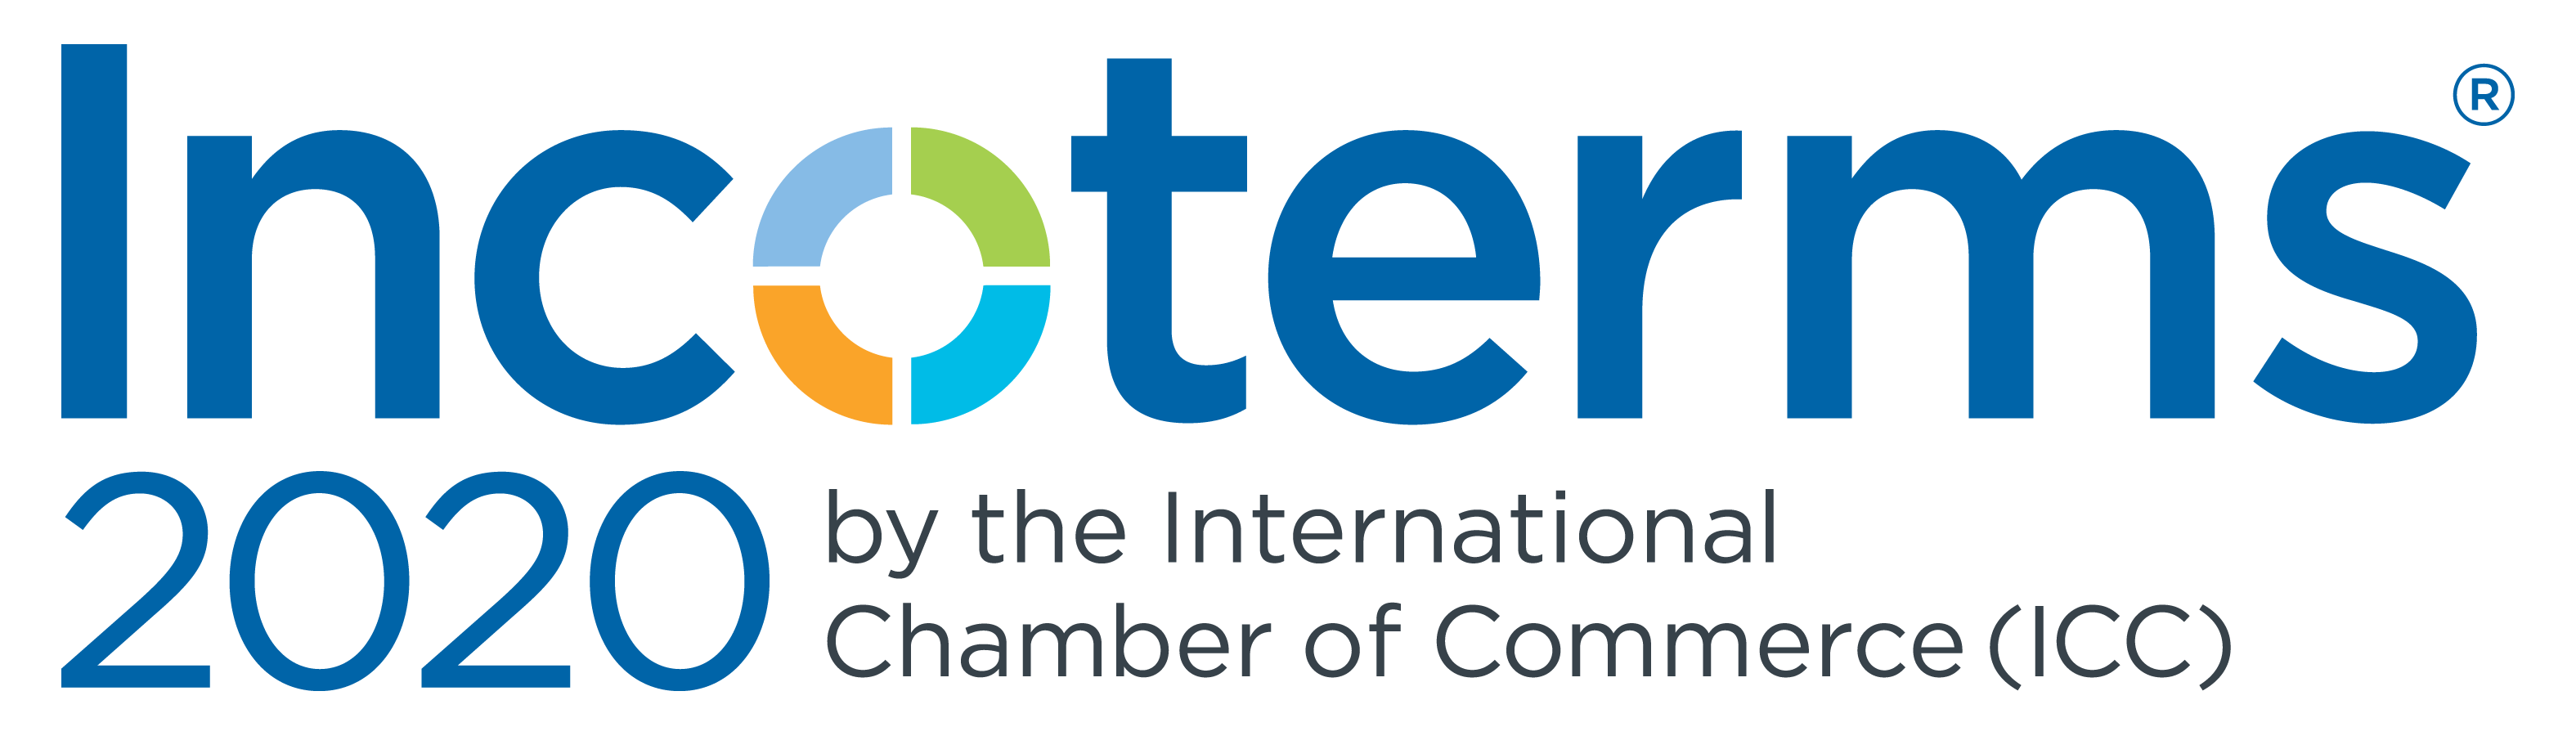 icc-incoterms®-2020-logo.png